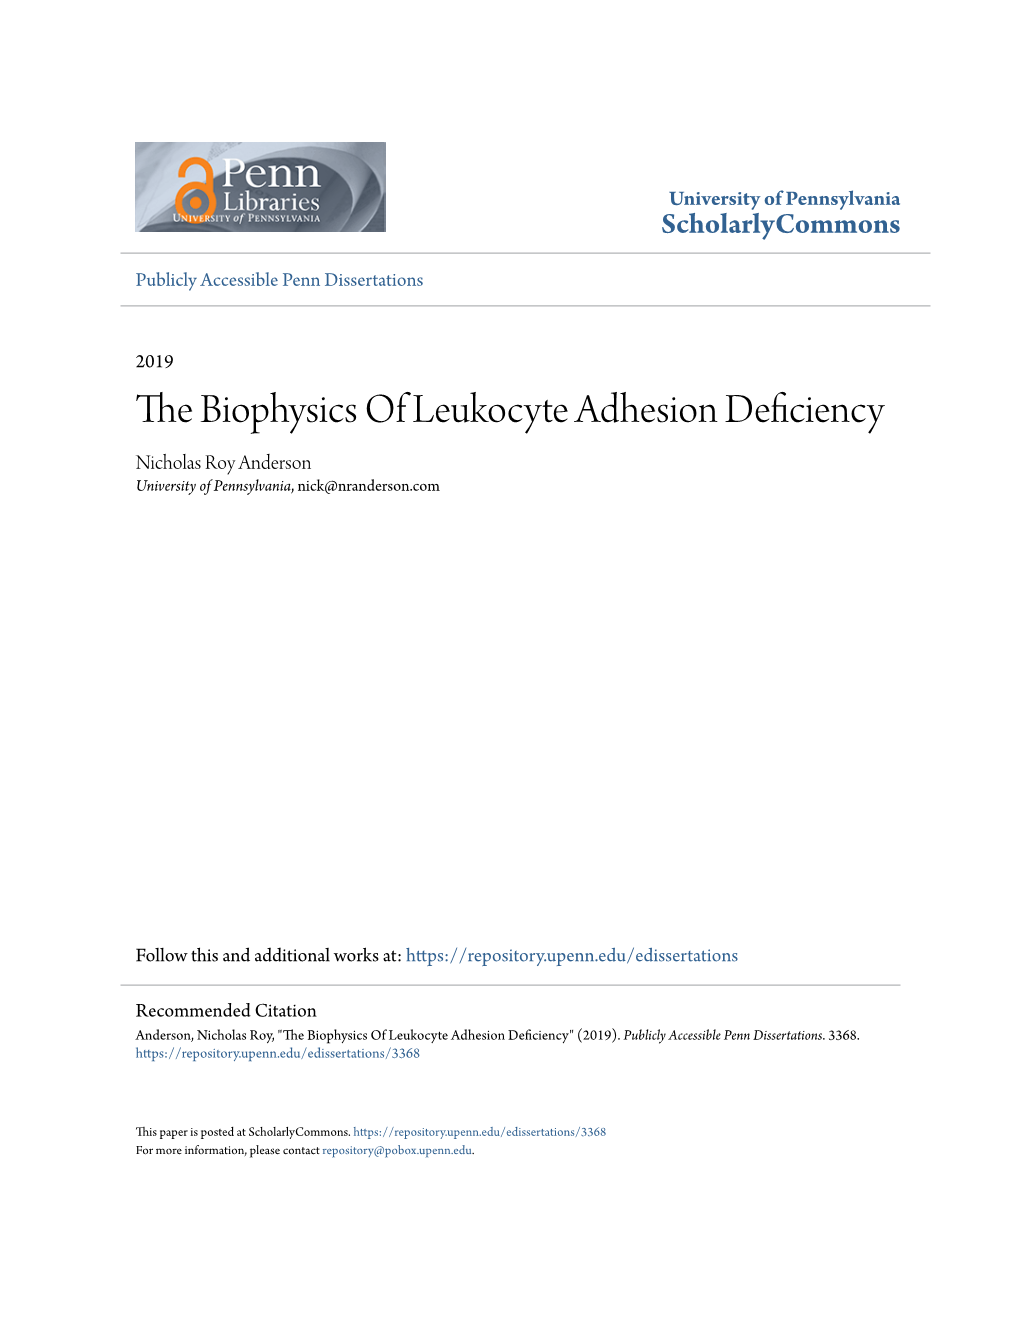 The Biophysics of Leukocyte Adhesion Deficiency